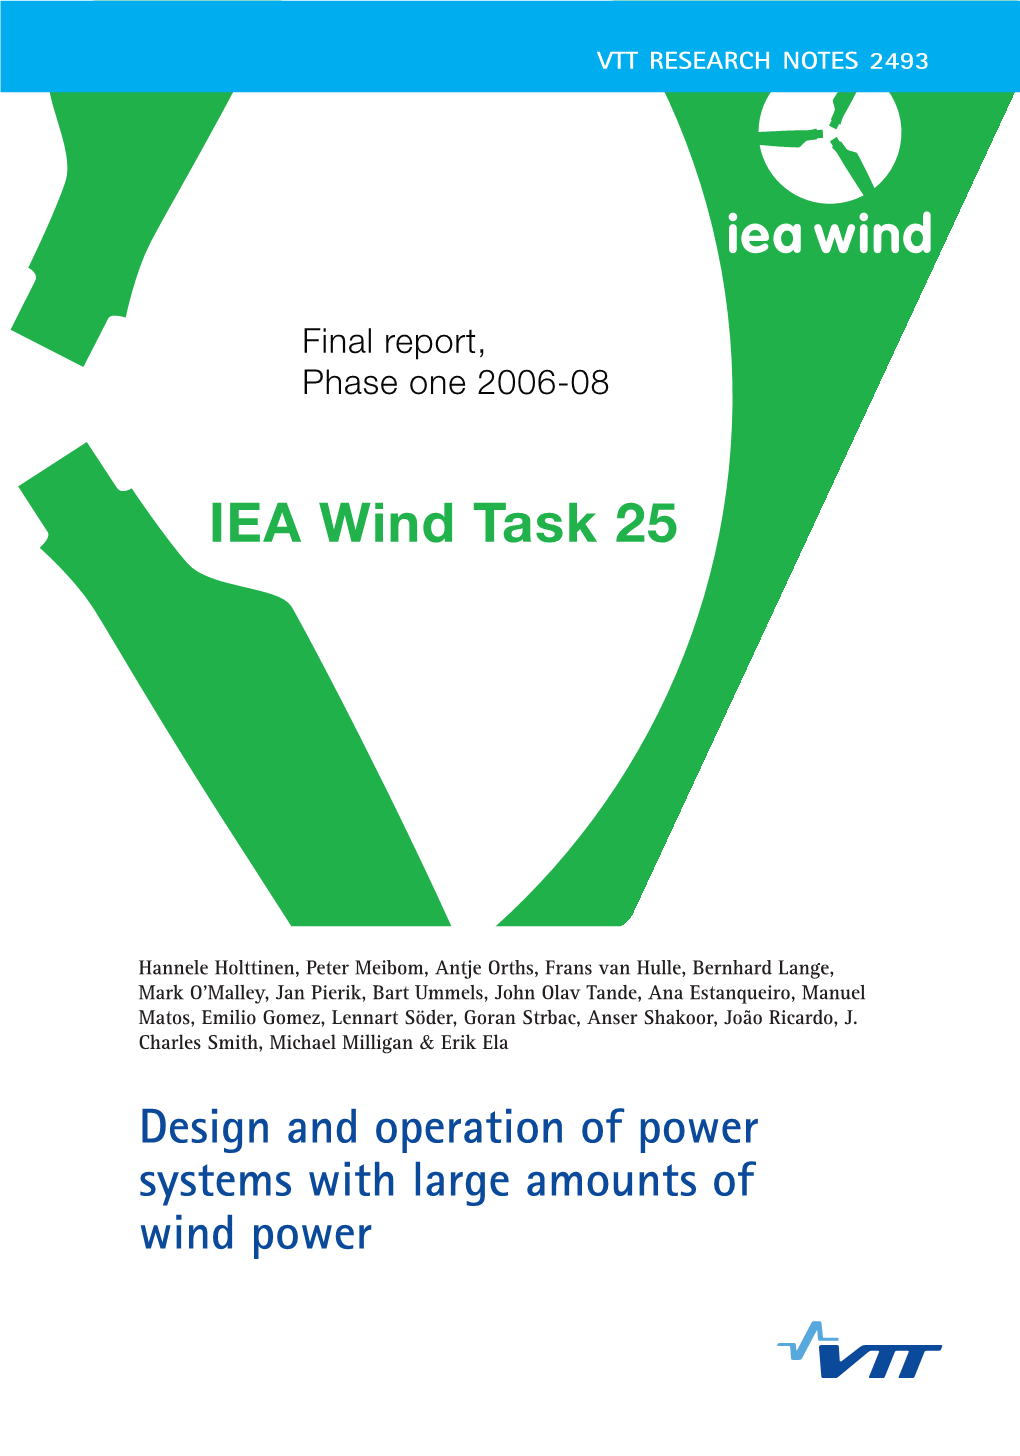 Design and Operation of Power Systems with Large Amounts of Wind Power